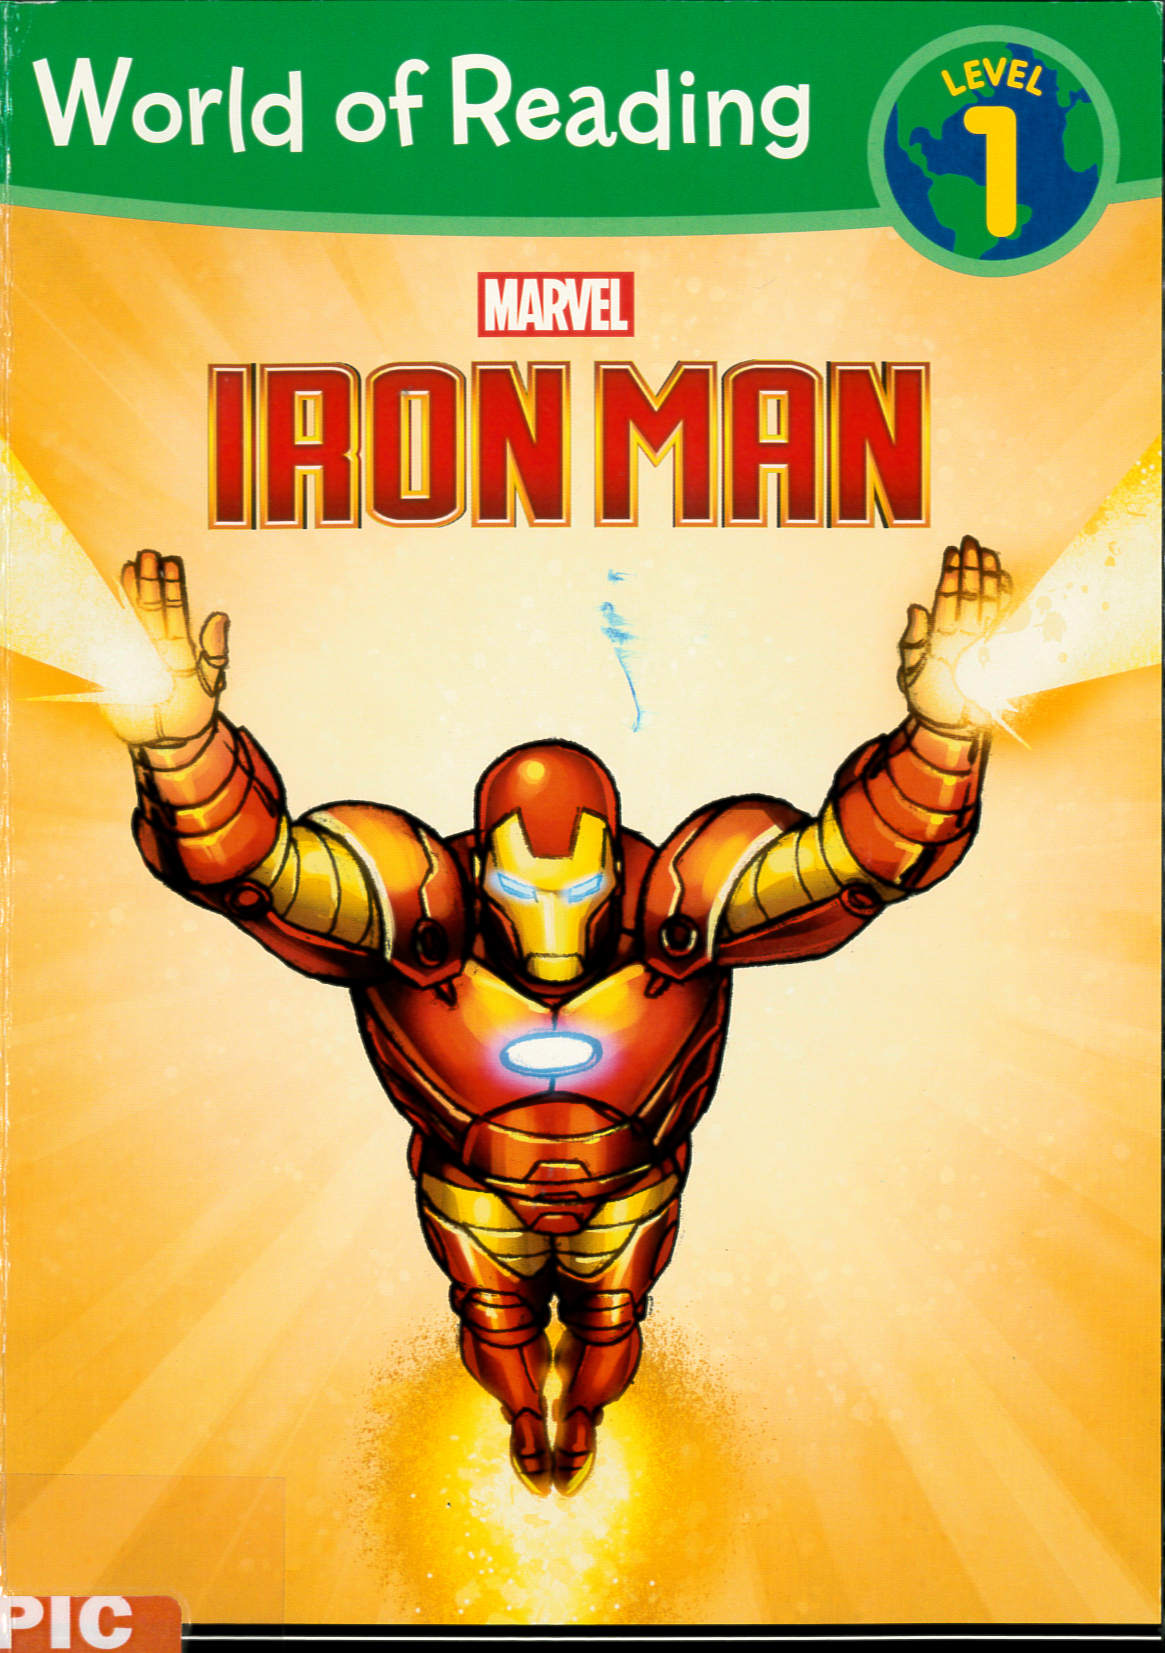 This is Iron Man /